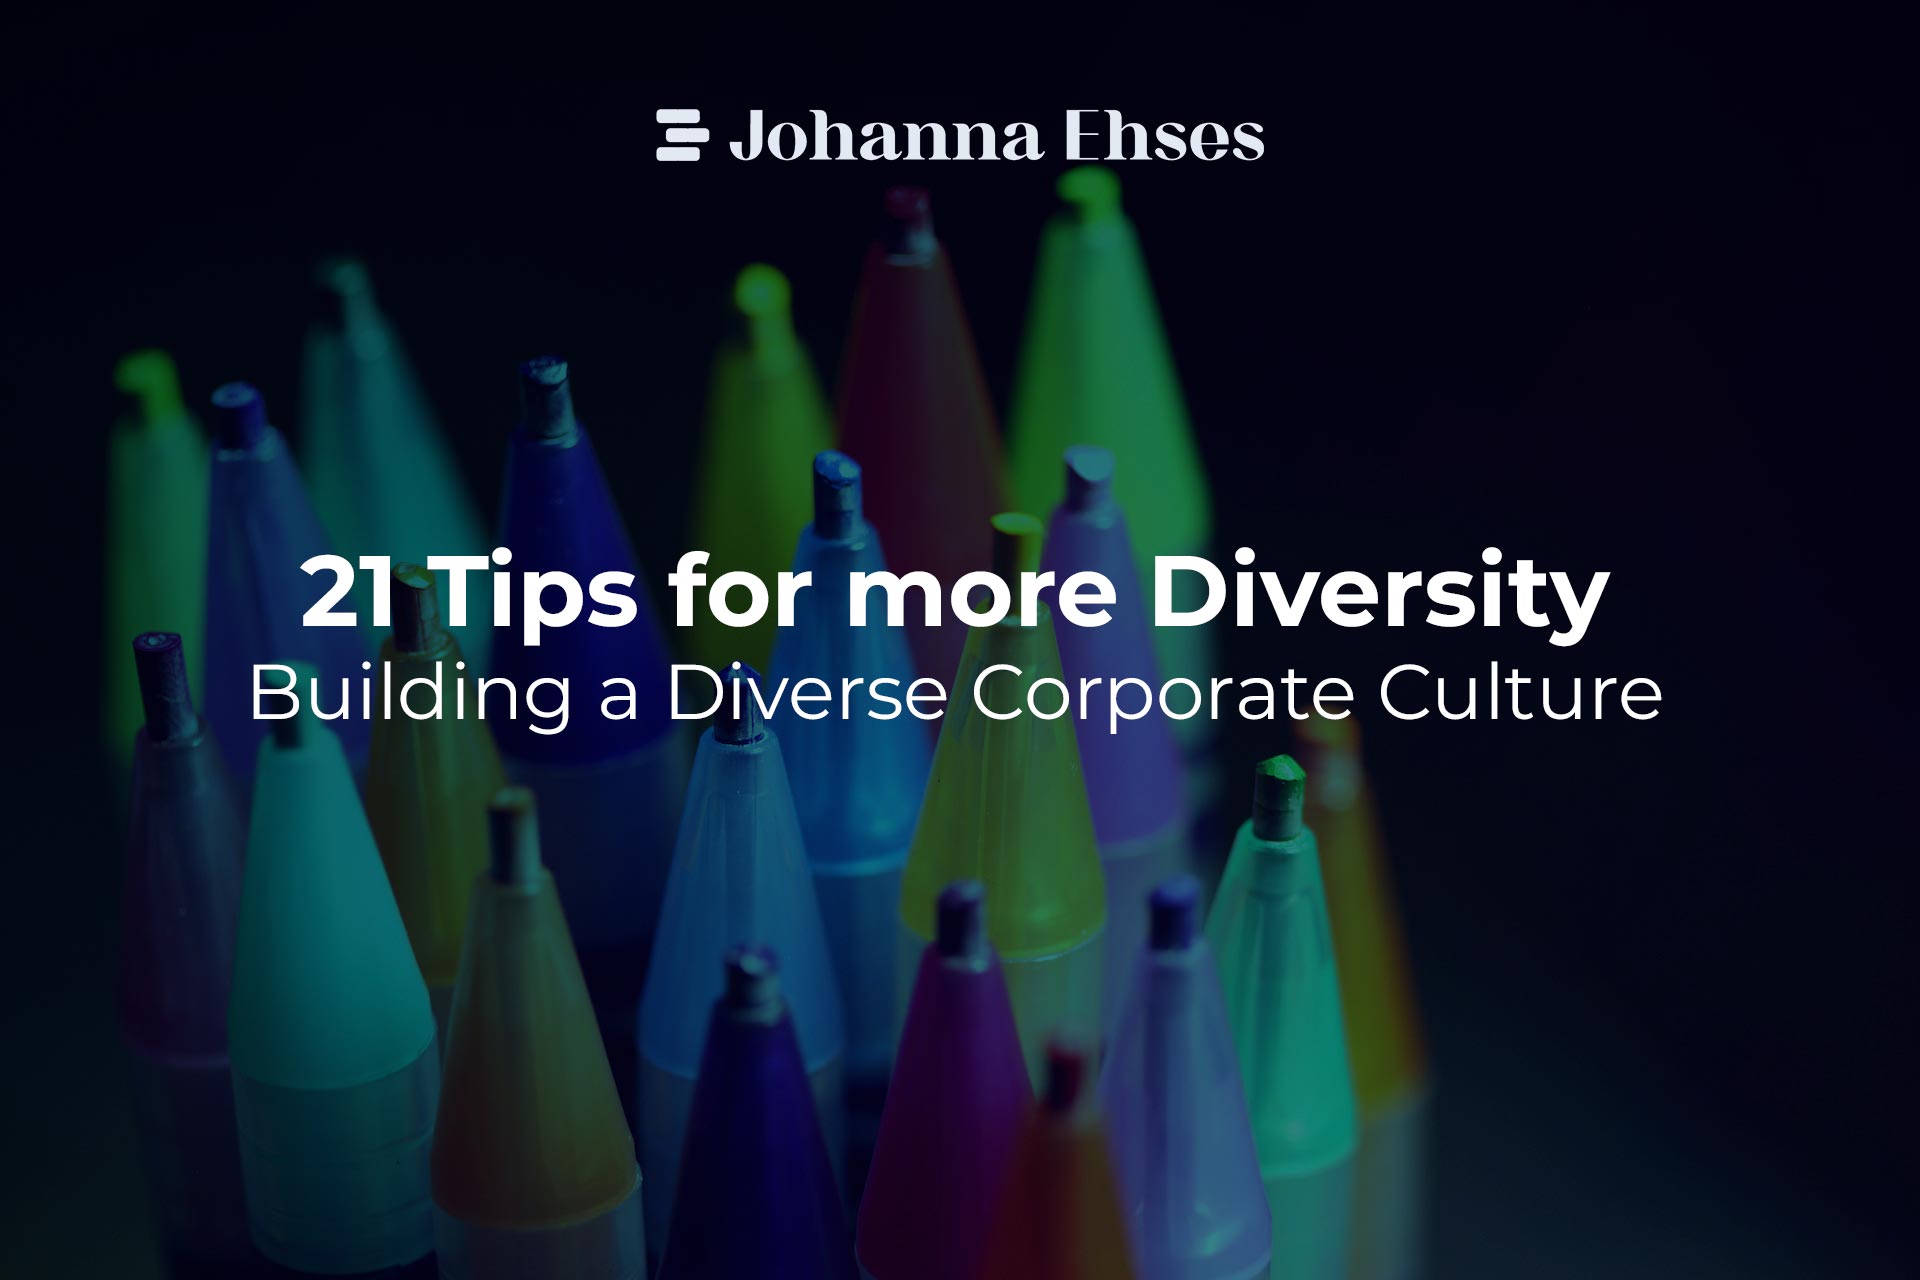 21 Tips for more Diversity - Building a Diverse Coroporate Culture